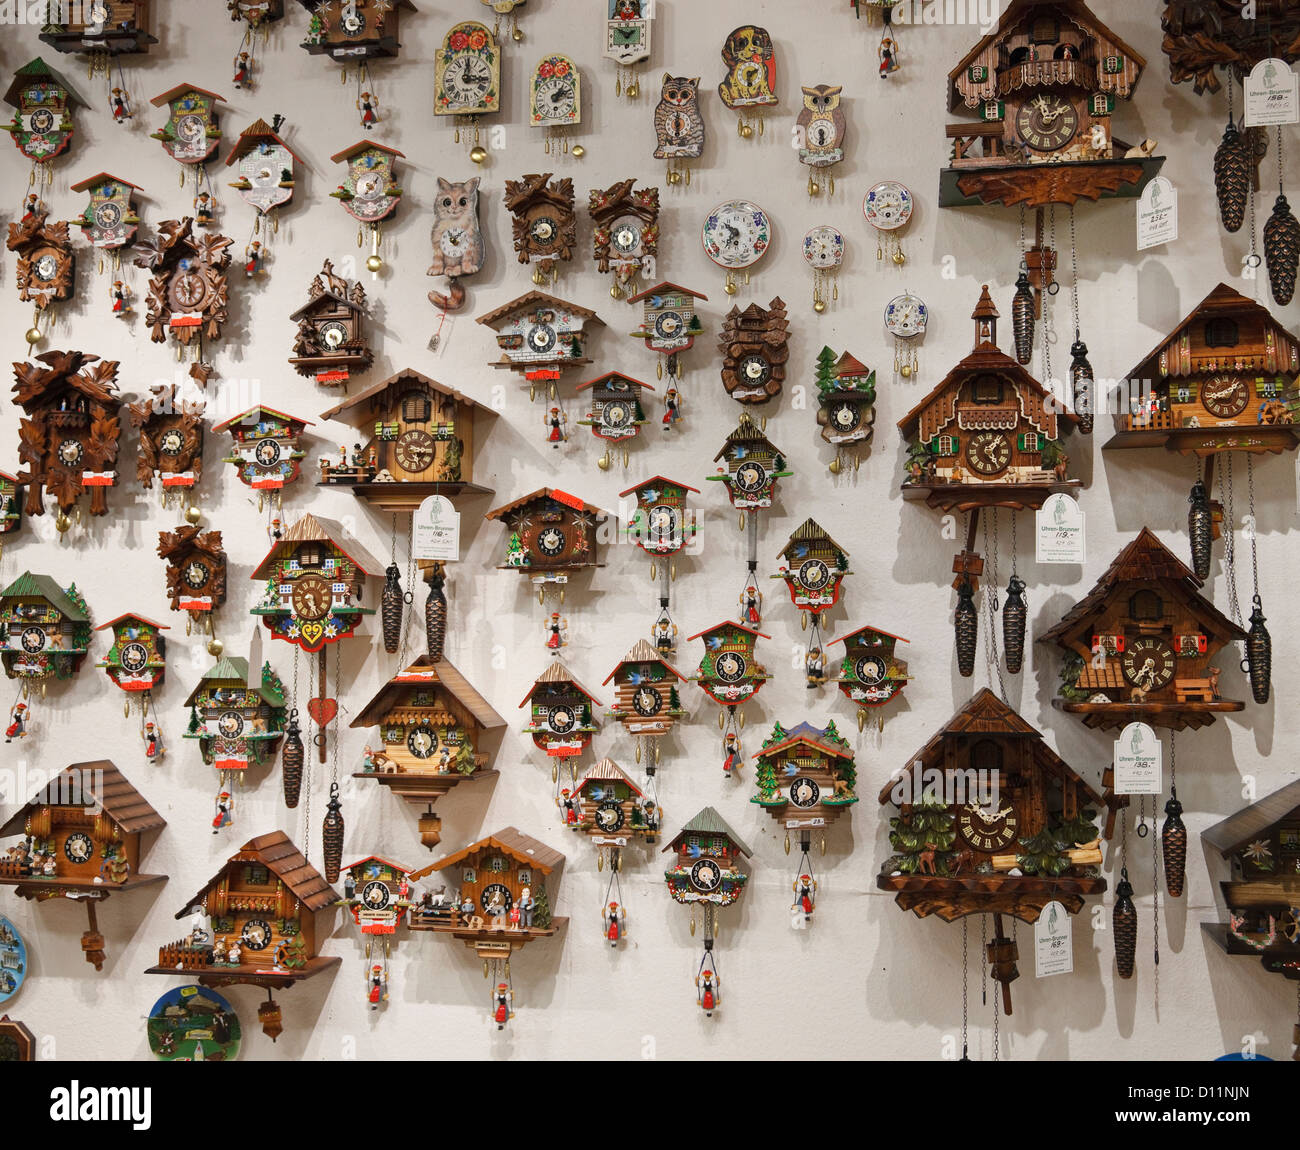 Wall display of Cuckoo clocks for sale inside a souvenir shop in Germany Stock Photo